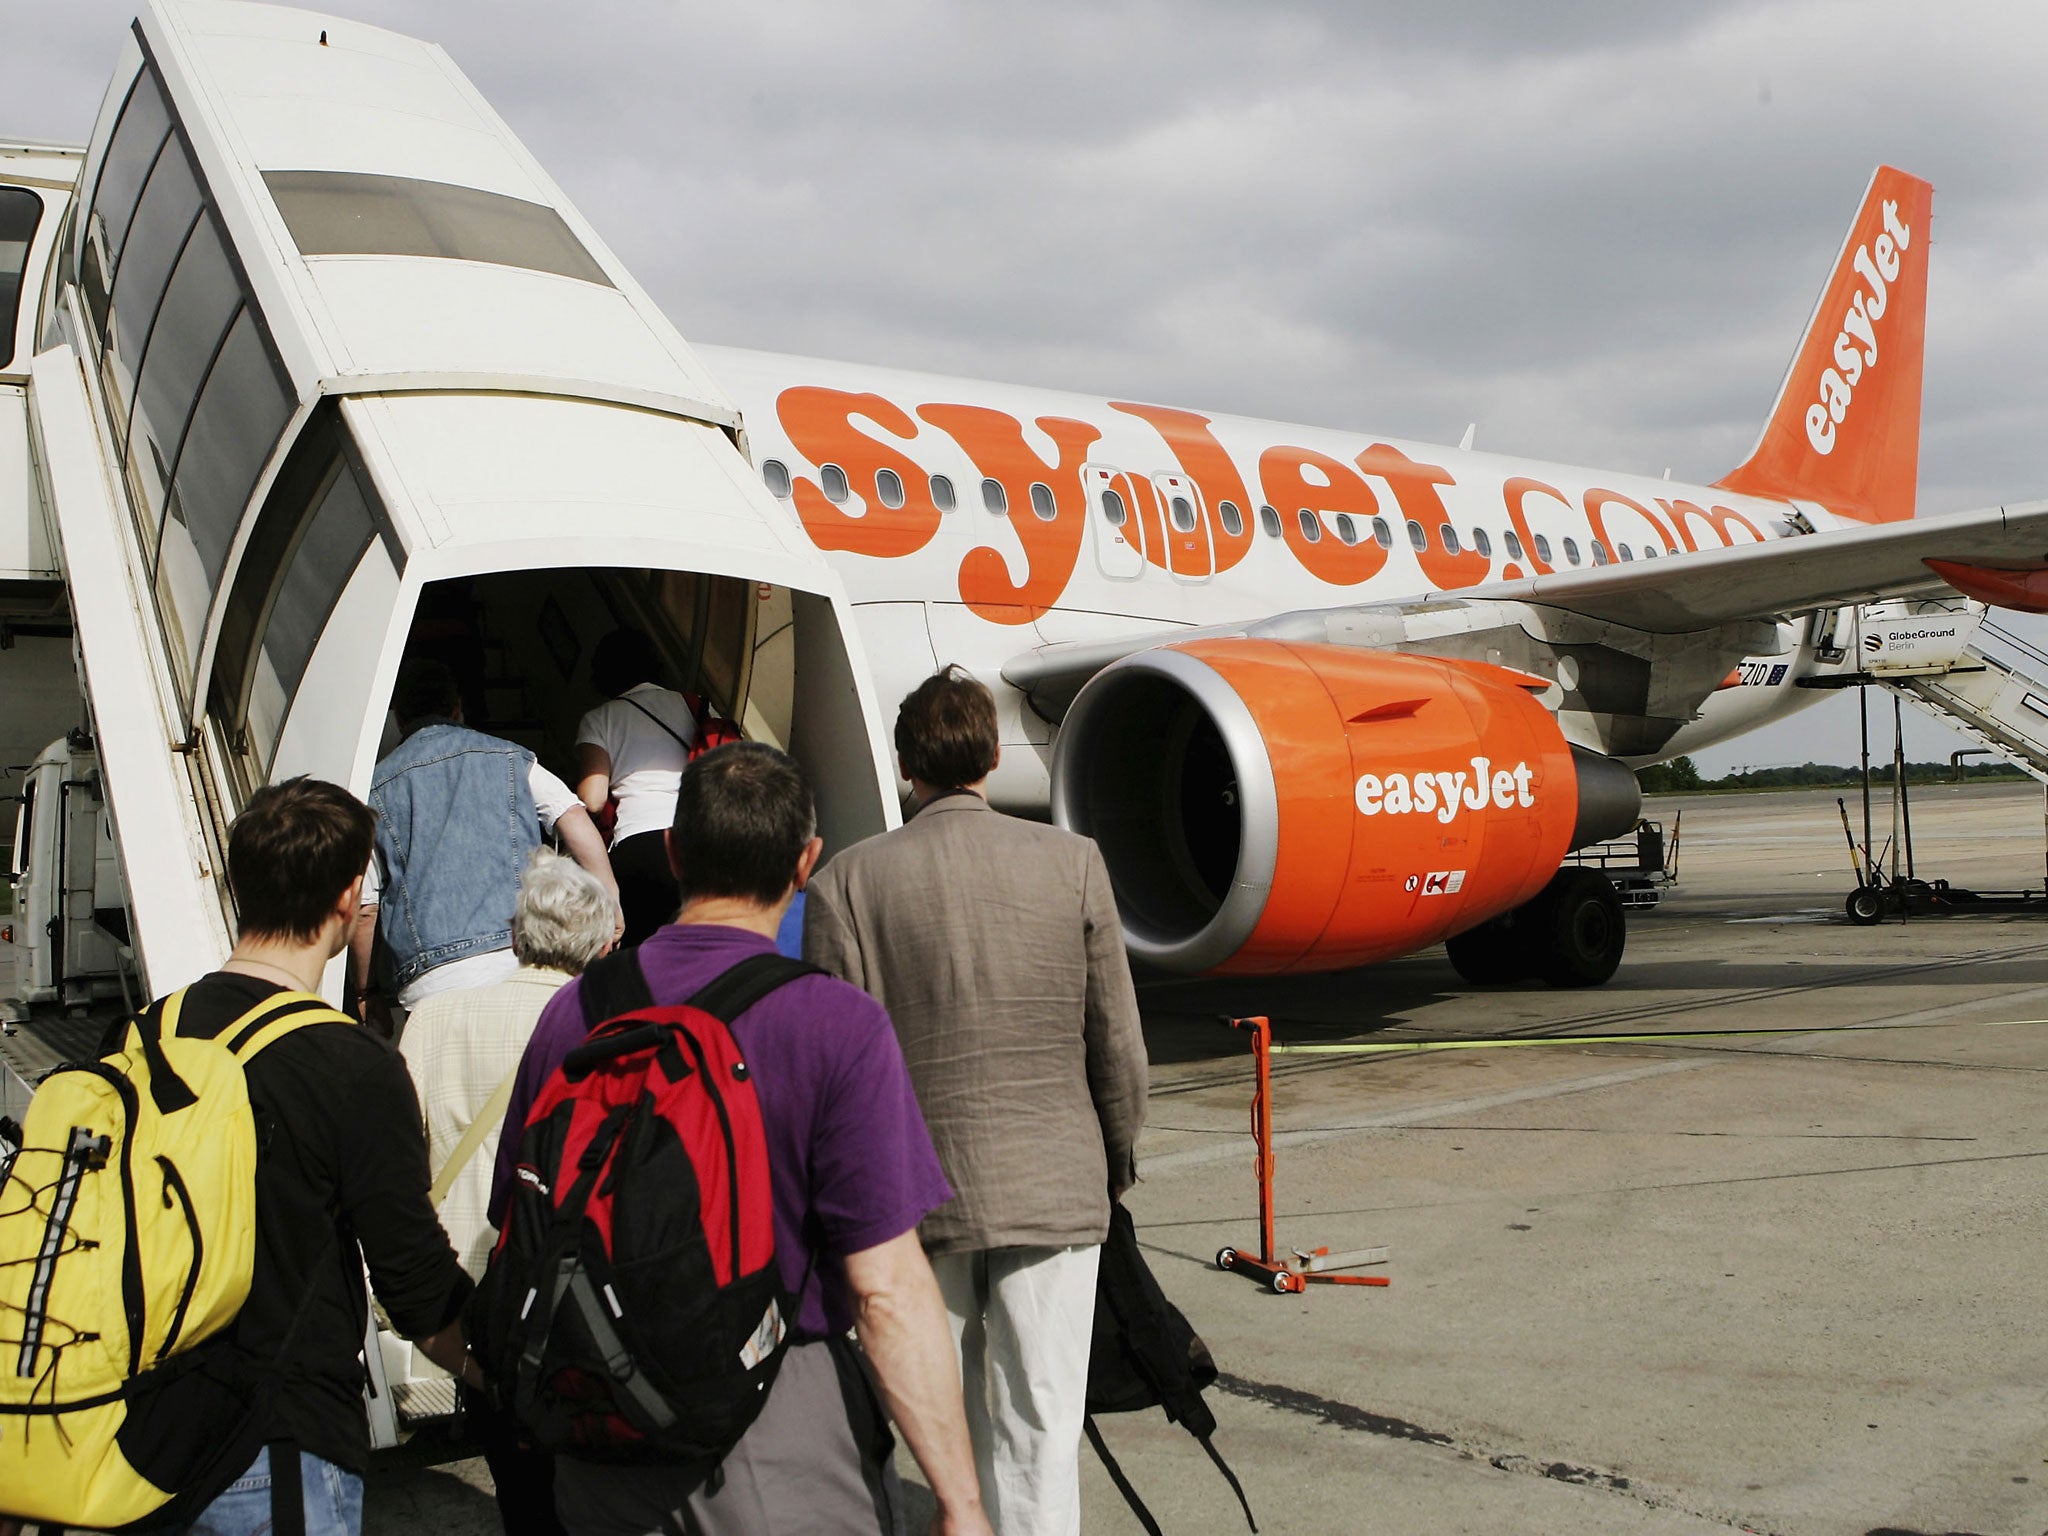 easyJet offers flexible fares for an extra fee